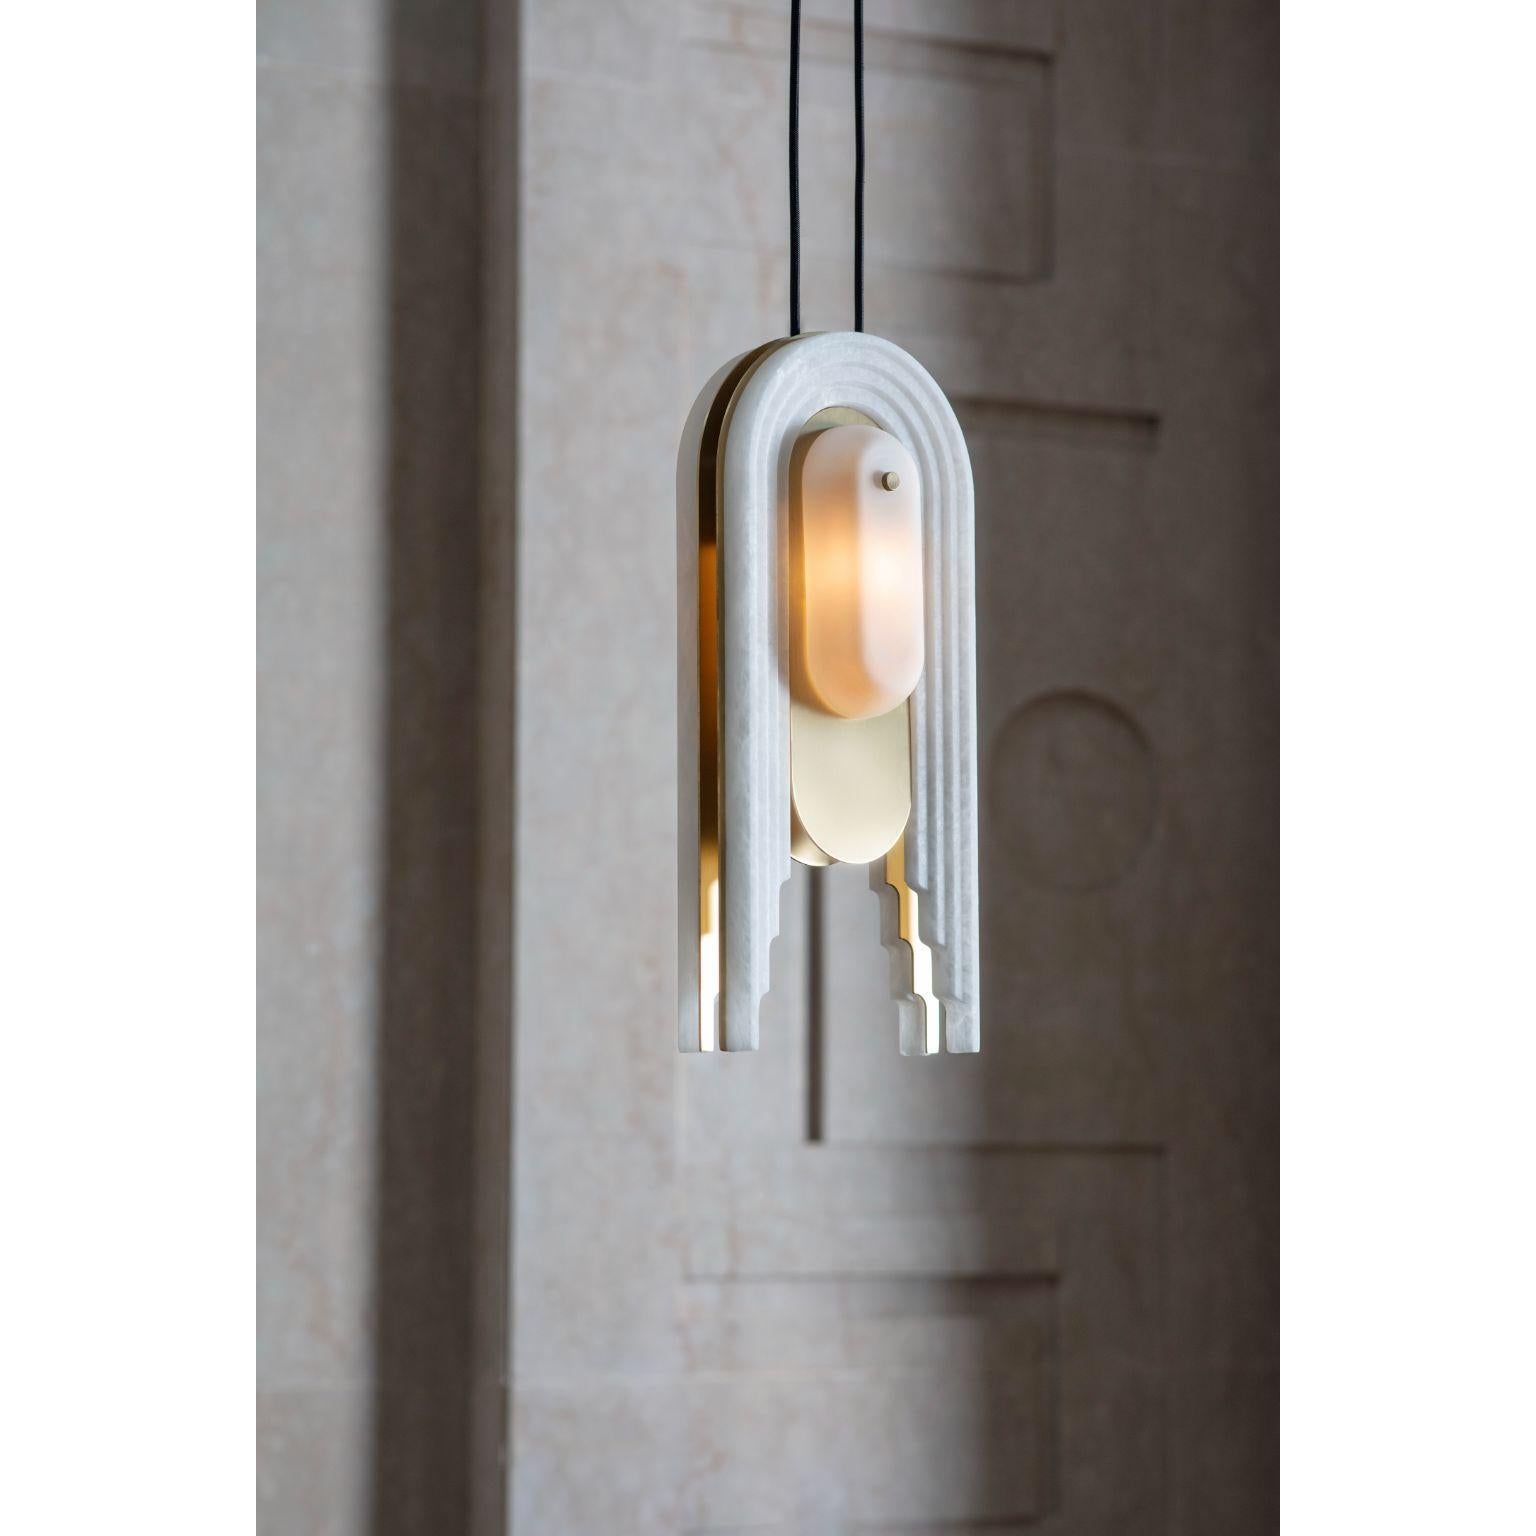 Vima small pendant light by Bert Frank
Dimensions: D 17.6 x W 9.3 x H 39.3 cm
Materials: Brass, Alabaster, Glass
Weight:5.5kg net, 6.5kg gross
Finishes: Brushed brass lacquered as standard, Alabaster facade
IP rating, IP20 rated, suitable for